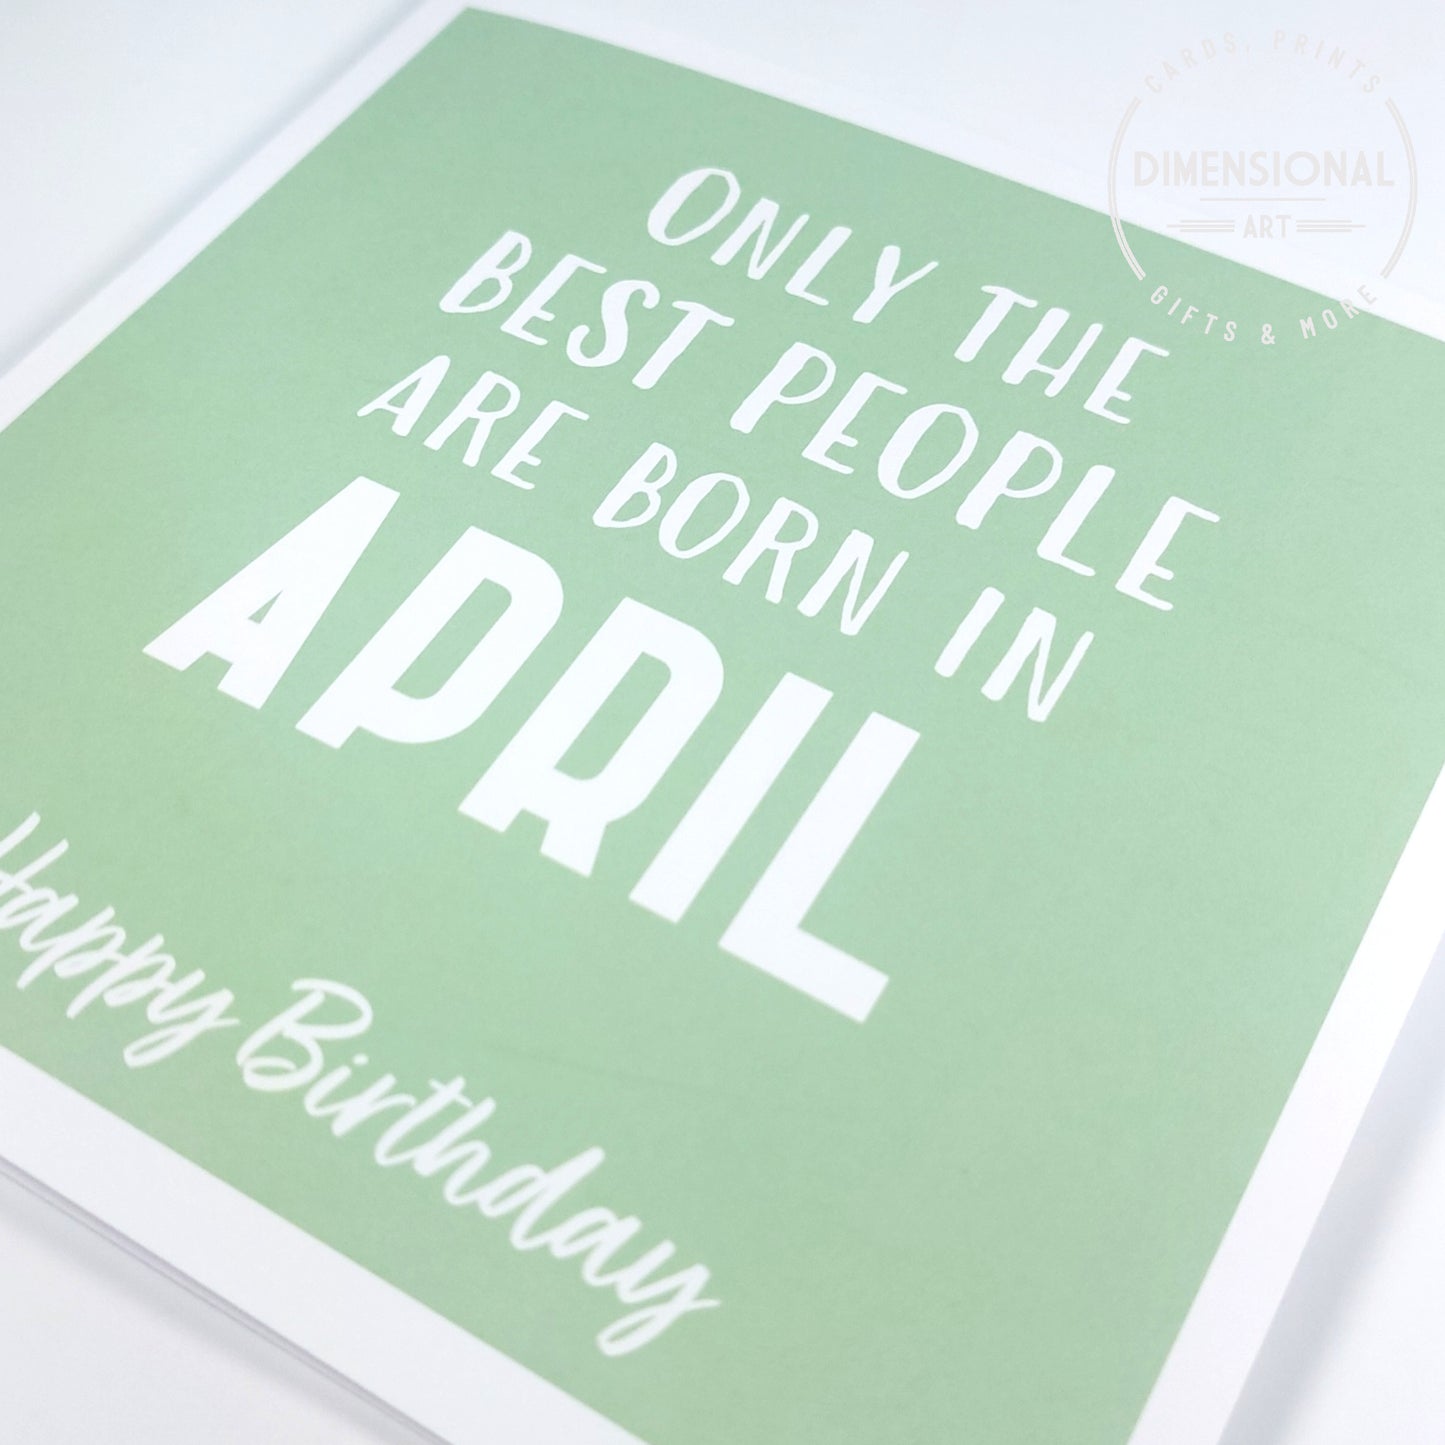 Best people are born in APRIL - Birthday Card